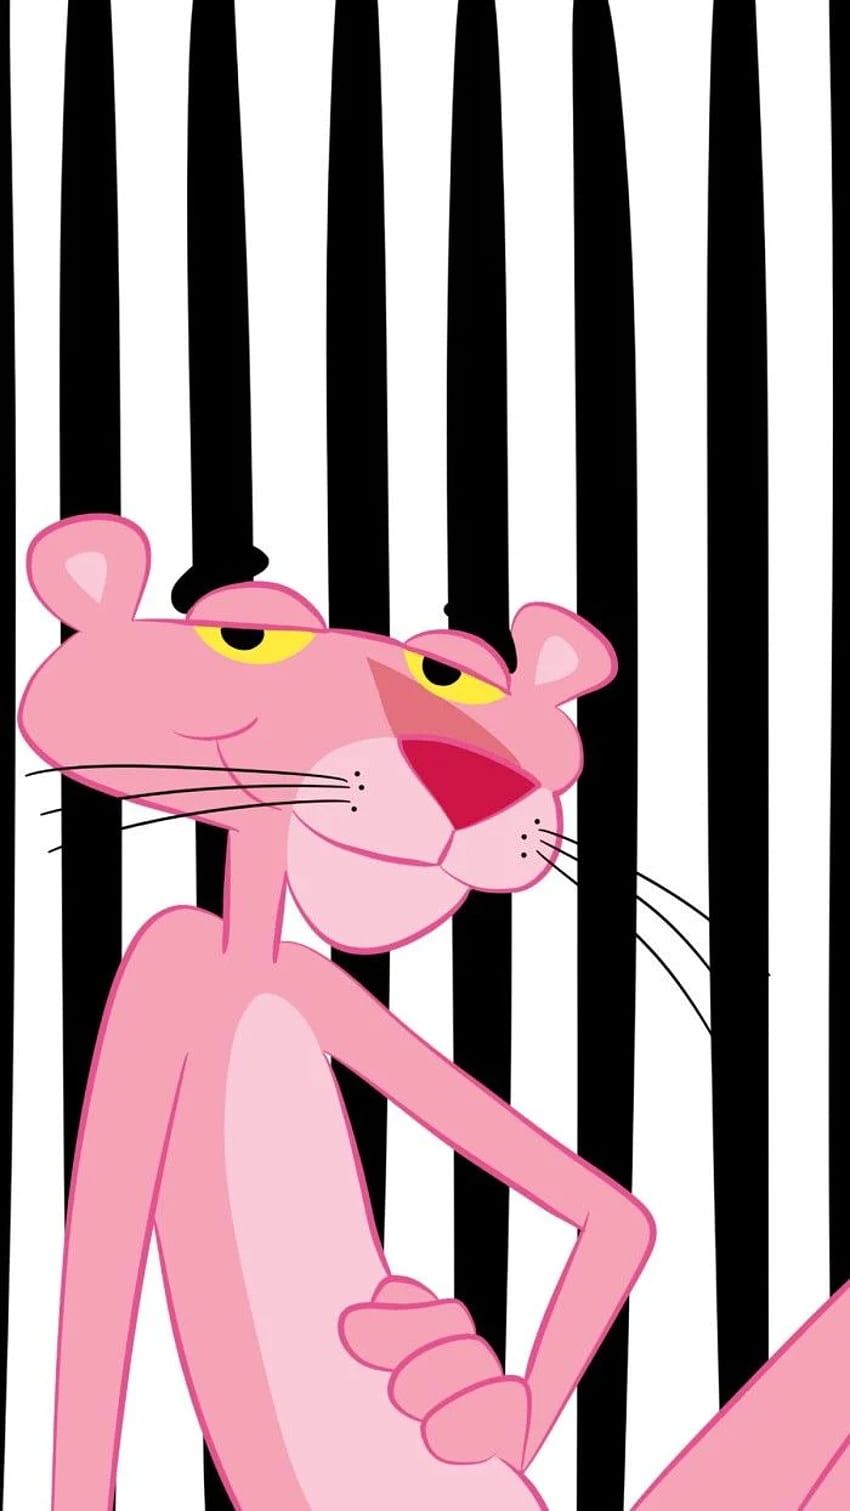 A pink cat sitting on the edge of his bed - Pink Panther